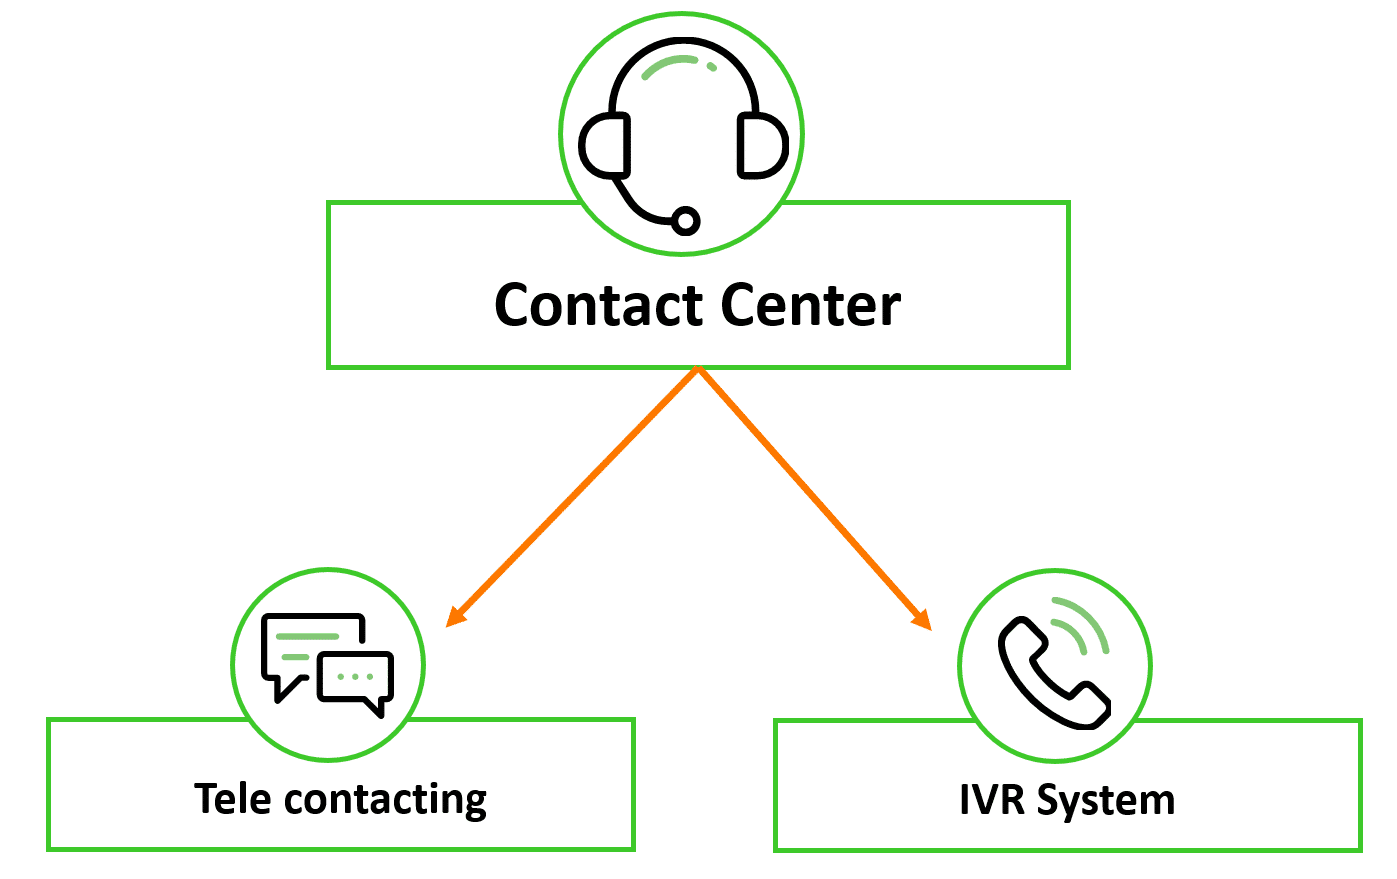 Contact Center Product family